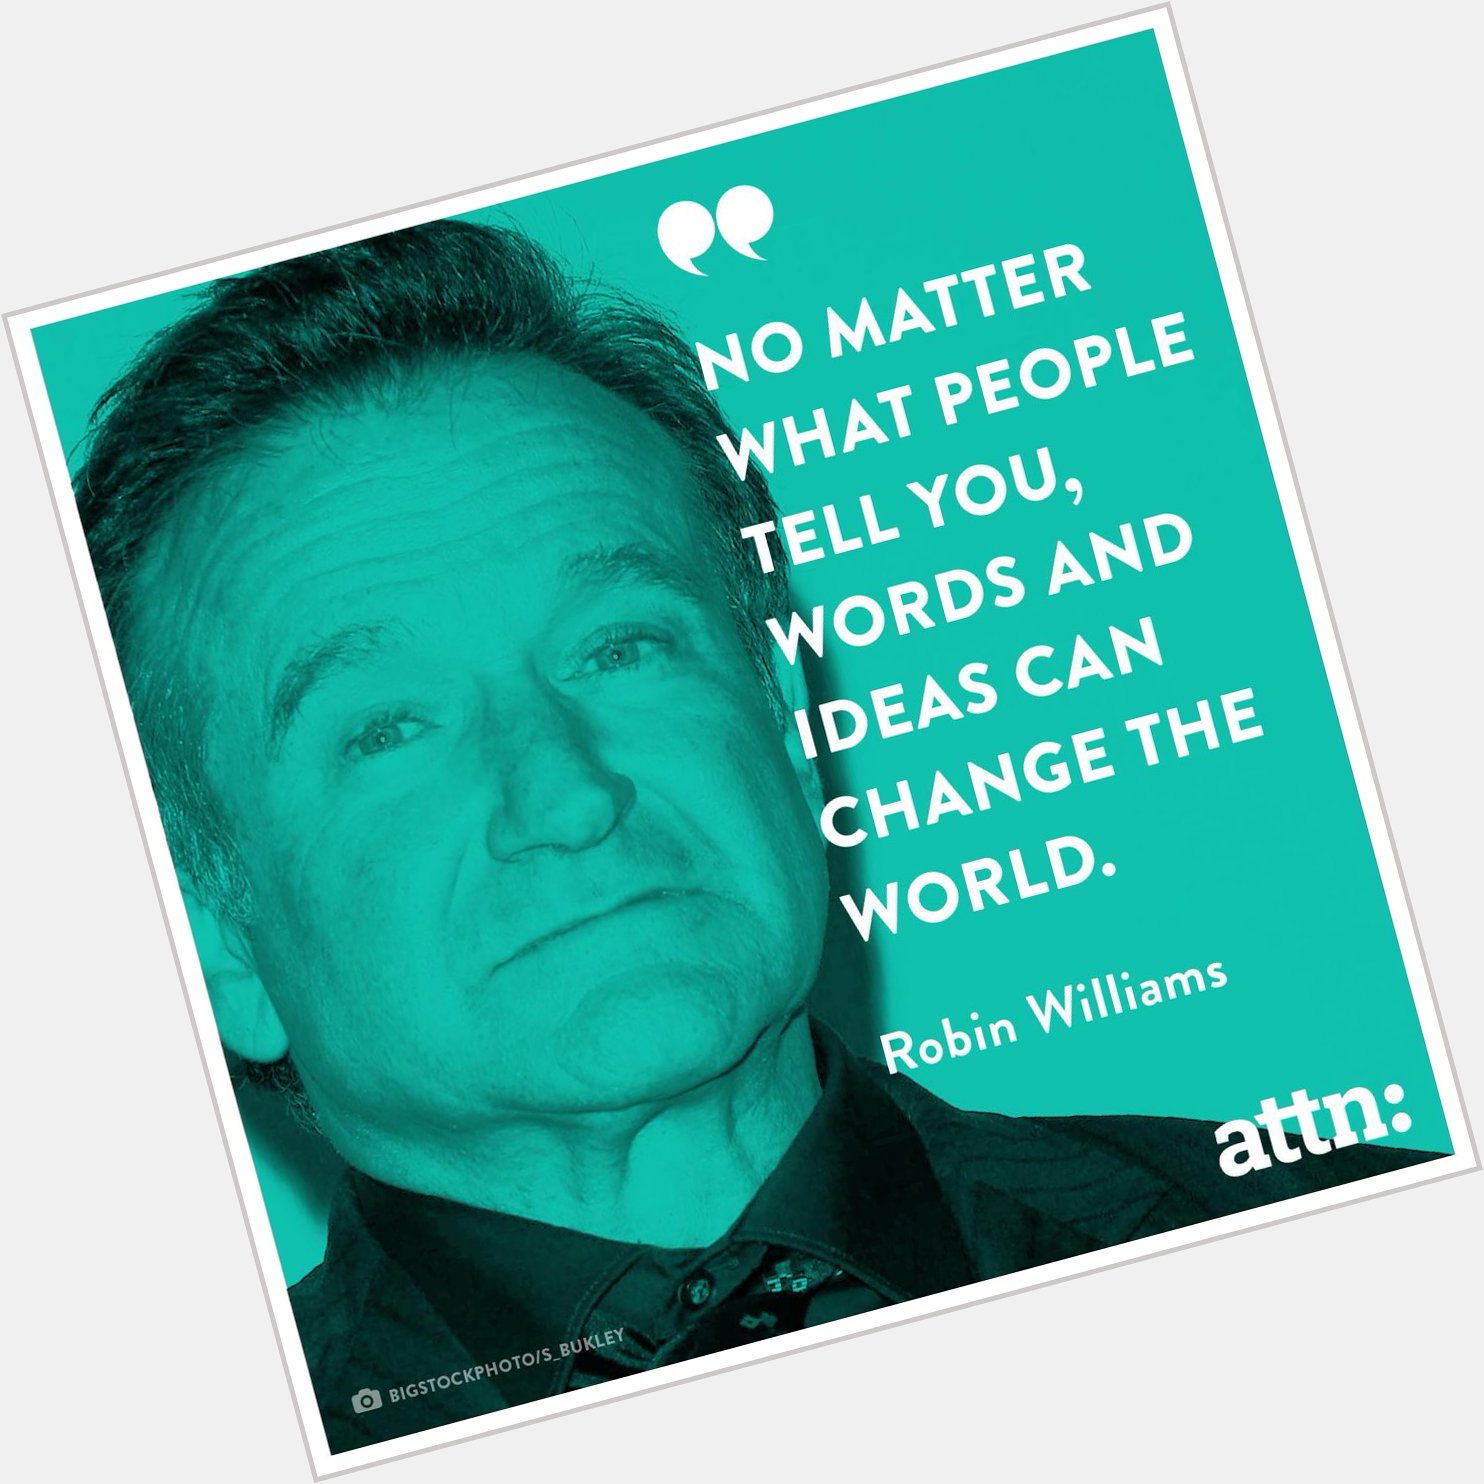 Happy belated birthday to Robin Williams. We miss your wit and grace. 